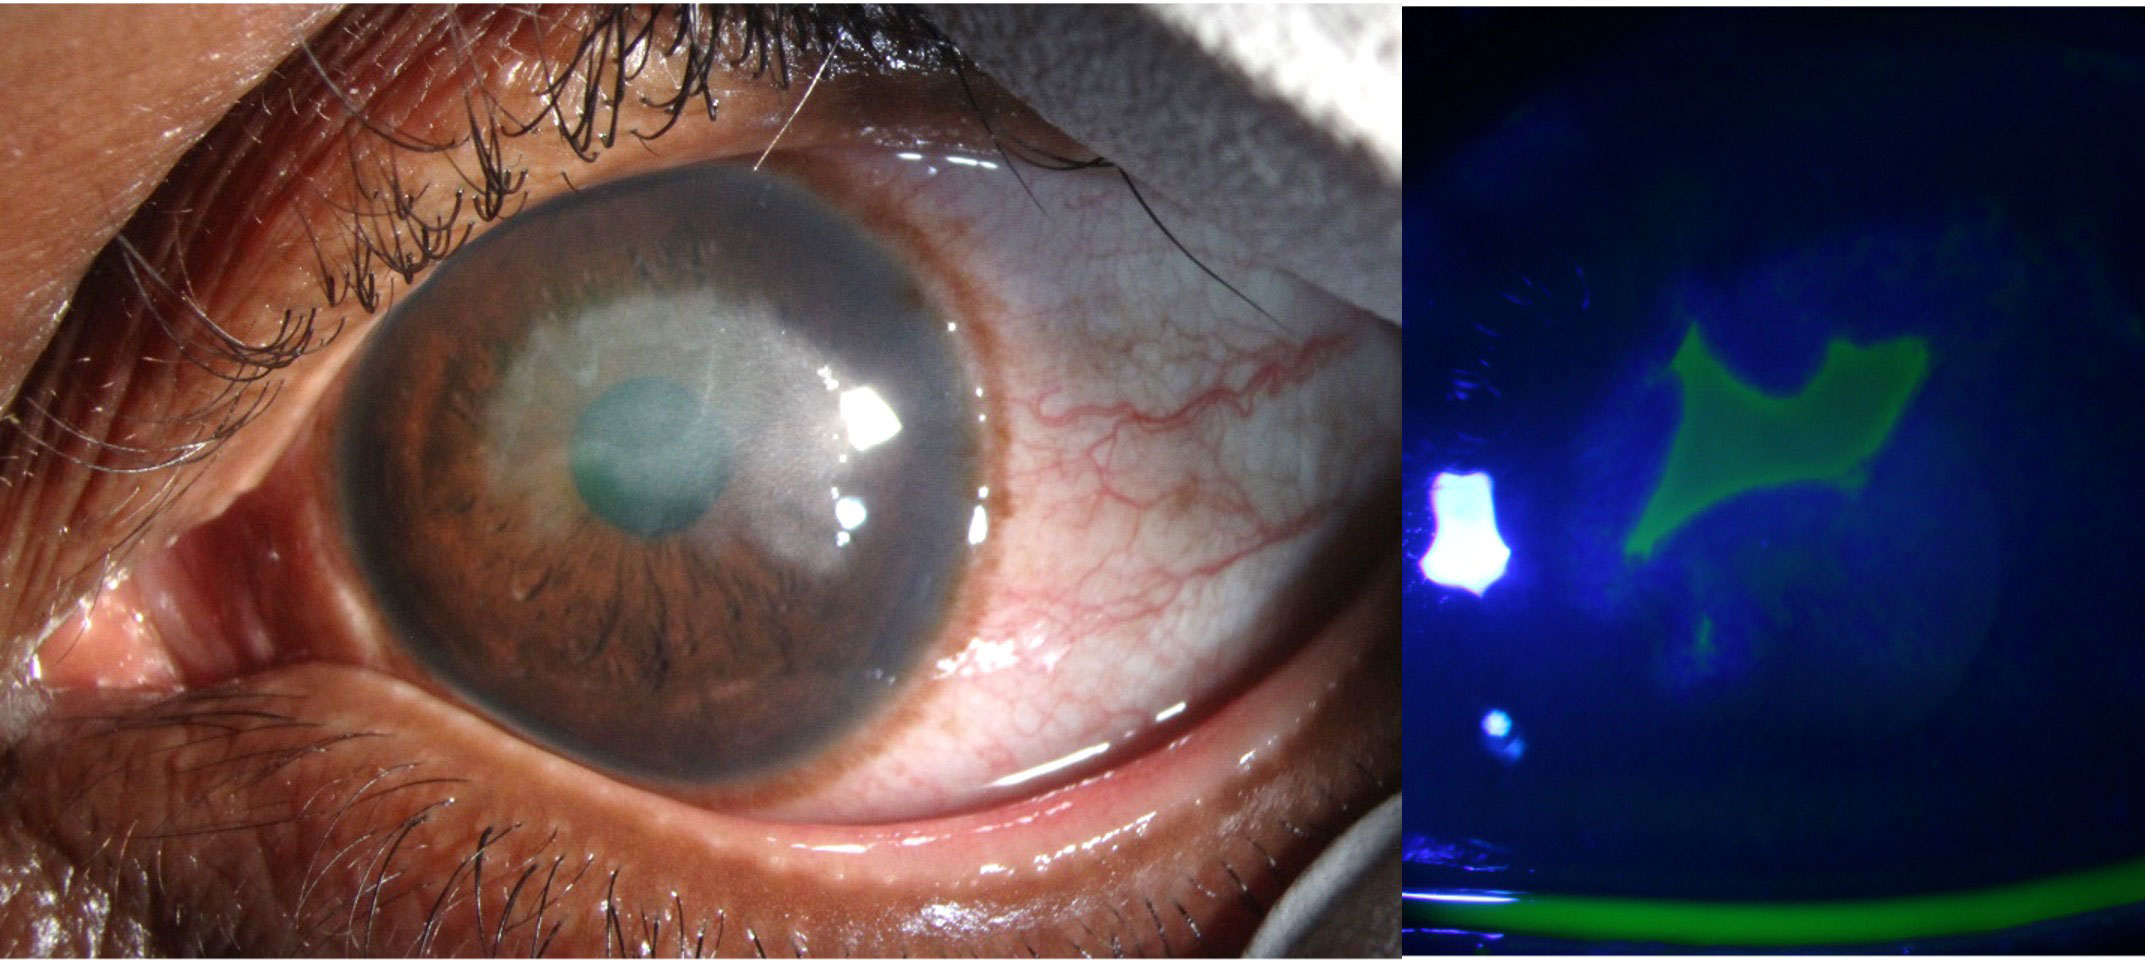 This patient presented with blurred vision but did not complain of significant pain. His examination revealed a geographic area of corneal haze with an overlying epithelial defect. He has a past medical history of recent irradiation to the ipsilateral jaw for adenoid cystic carcinoma of the salivary gland. Due to the geographic appearance of the defect, this patient was started on an oral antiviral along with intense lubrication of the eye.